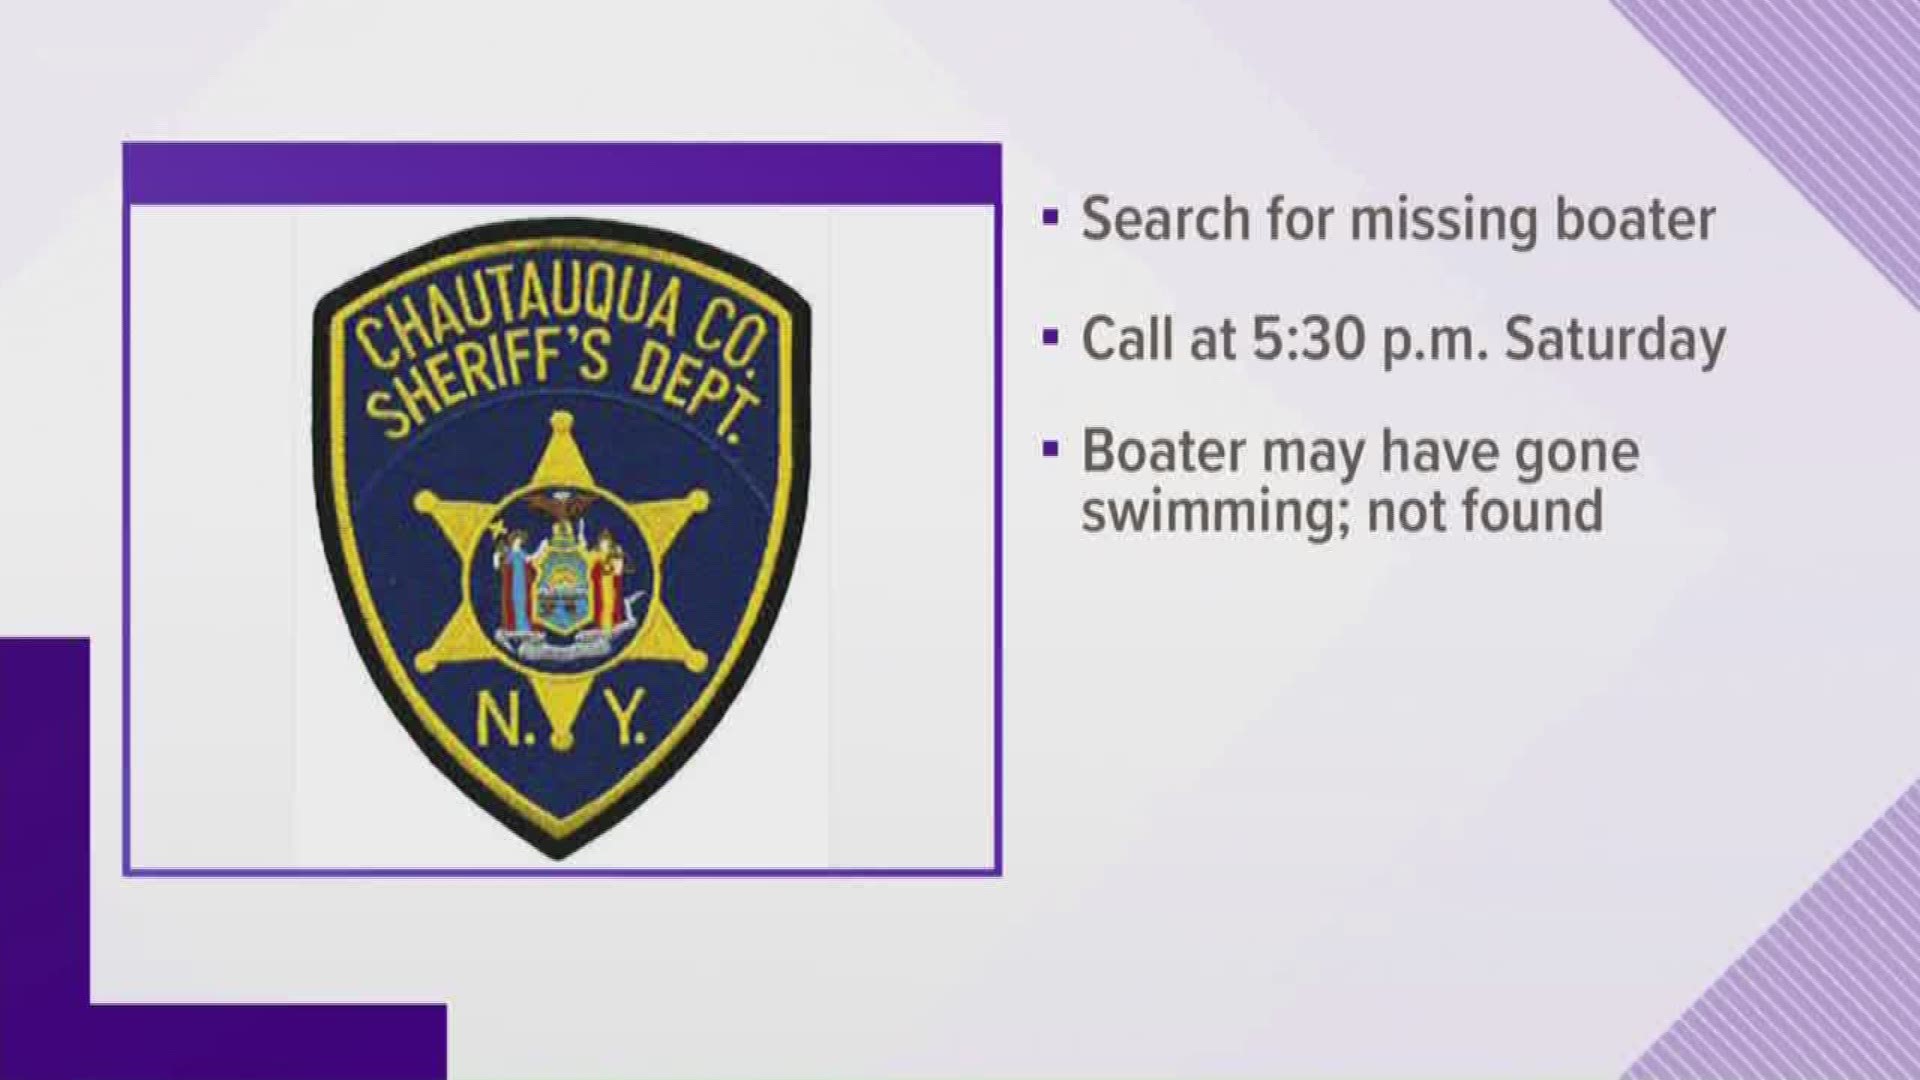 Search for missing boater on Chautauqua Lake